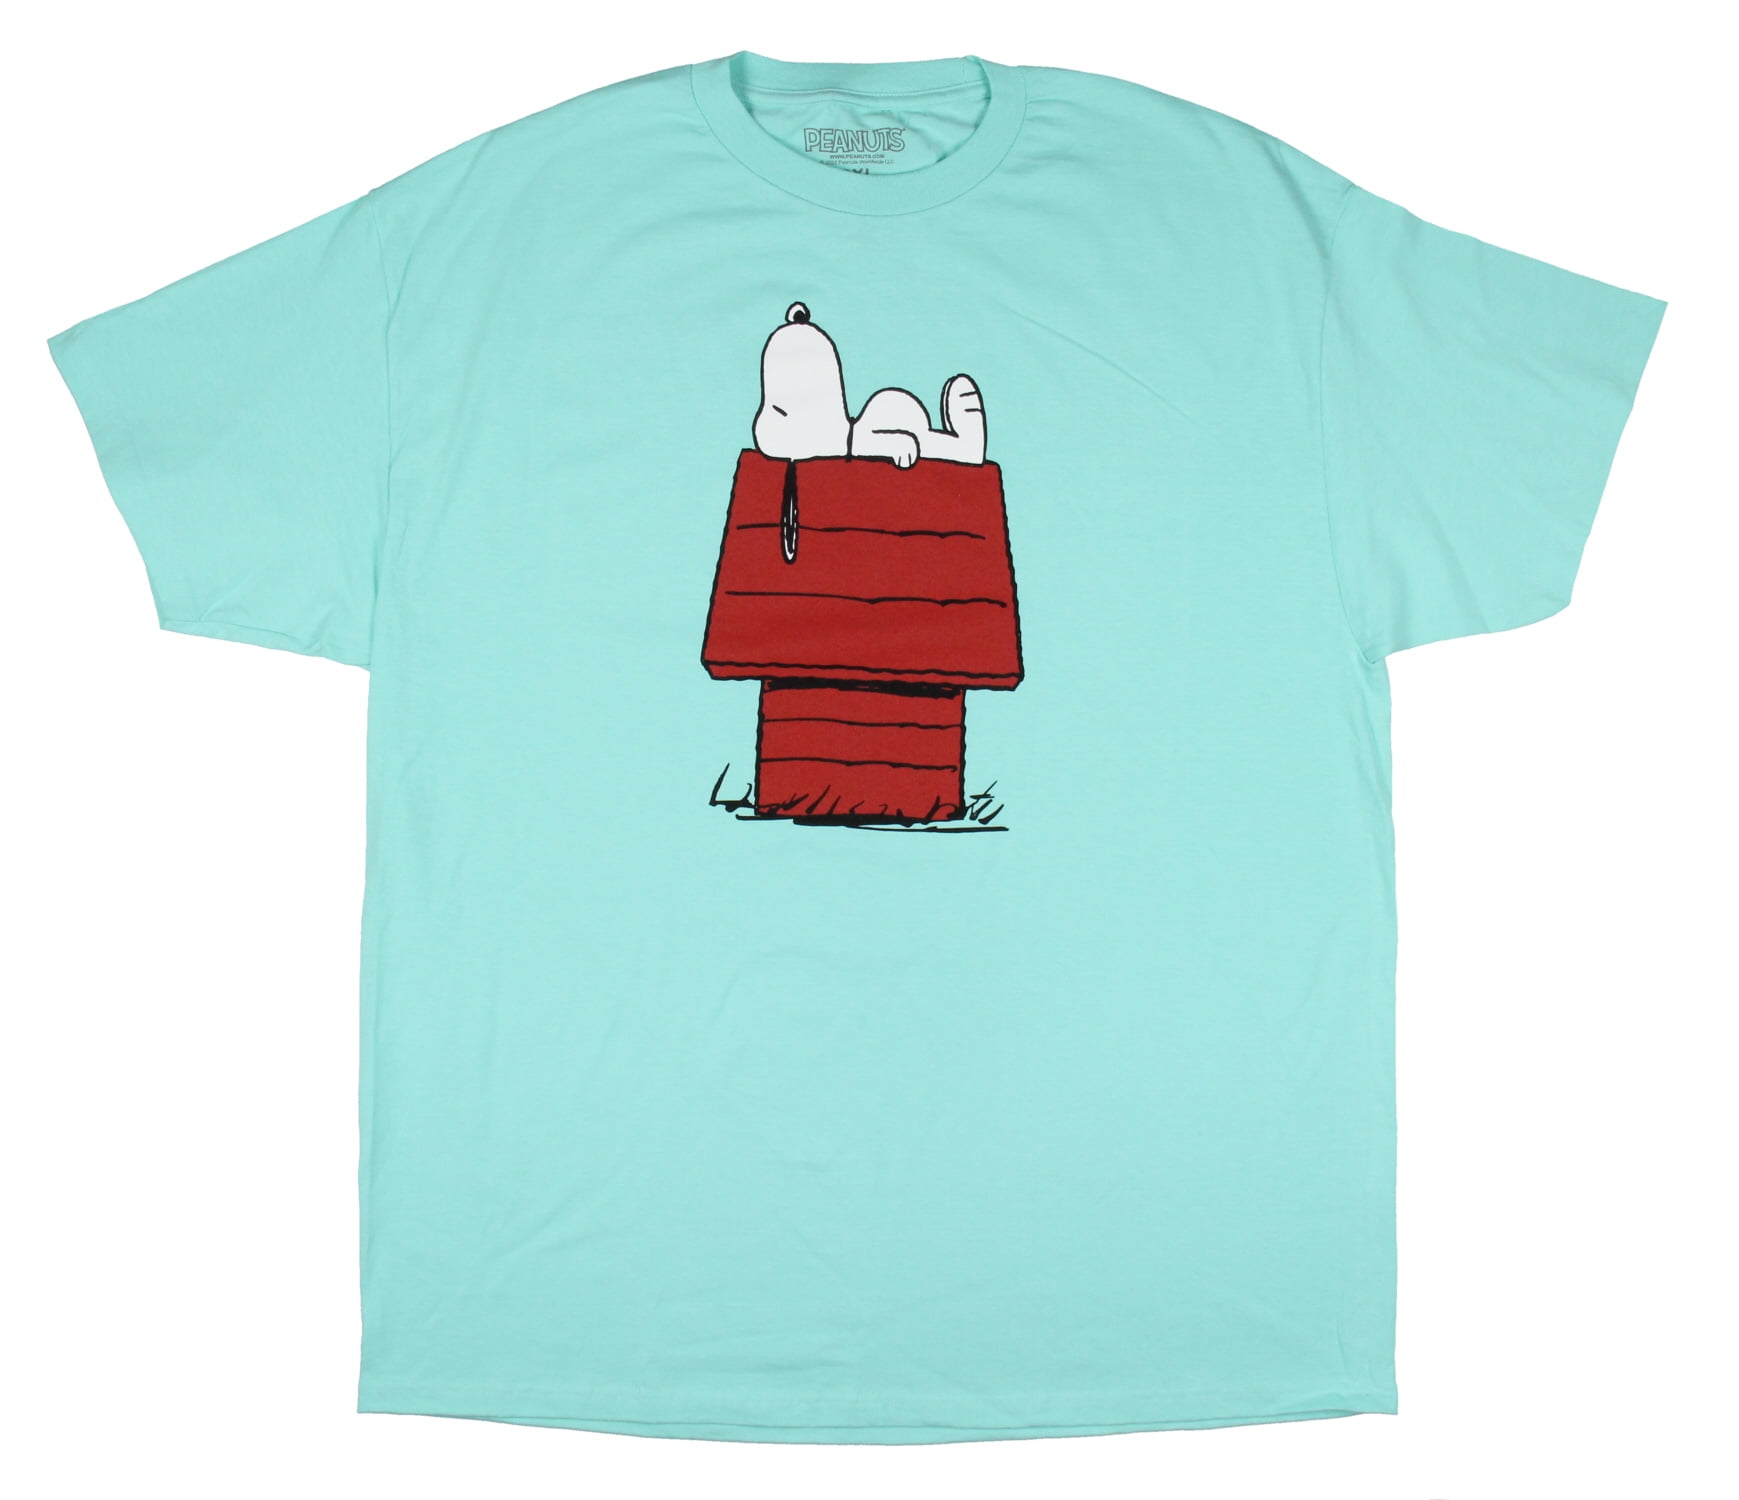 Peanuts Men\'s (Heather Large) on Graphic T-Shirt Snoopy Doghouse Sleeping Red Grey,